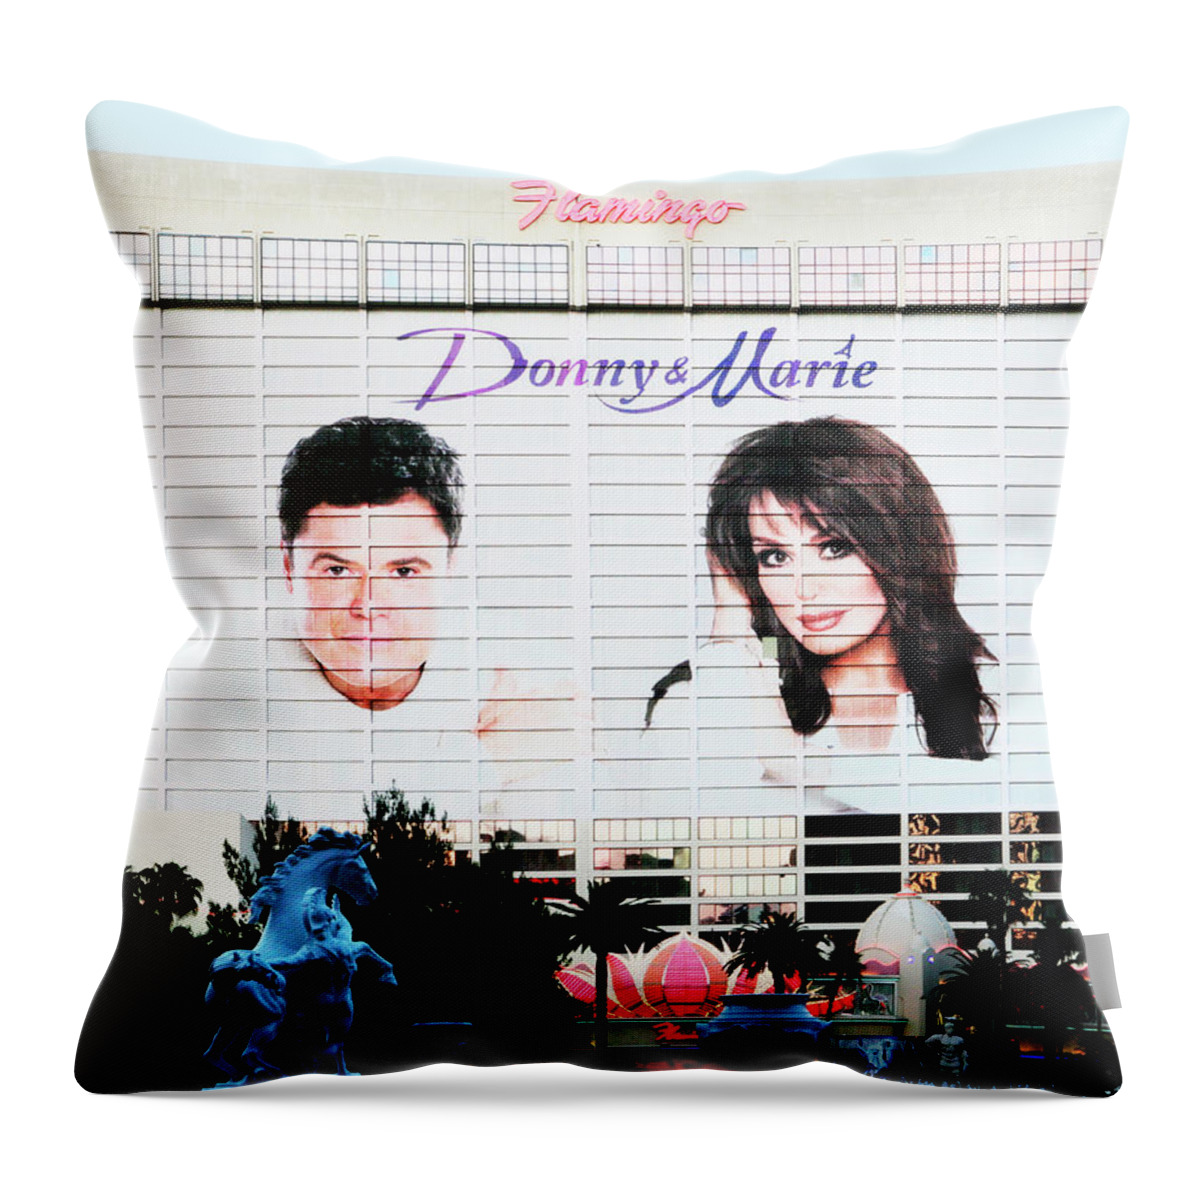 Donny And Marie Osmond Throw Pillow featuring the photograph Donny and Marie Osmond Large Ad on Hotel by Marilyn Hunt